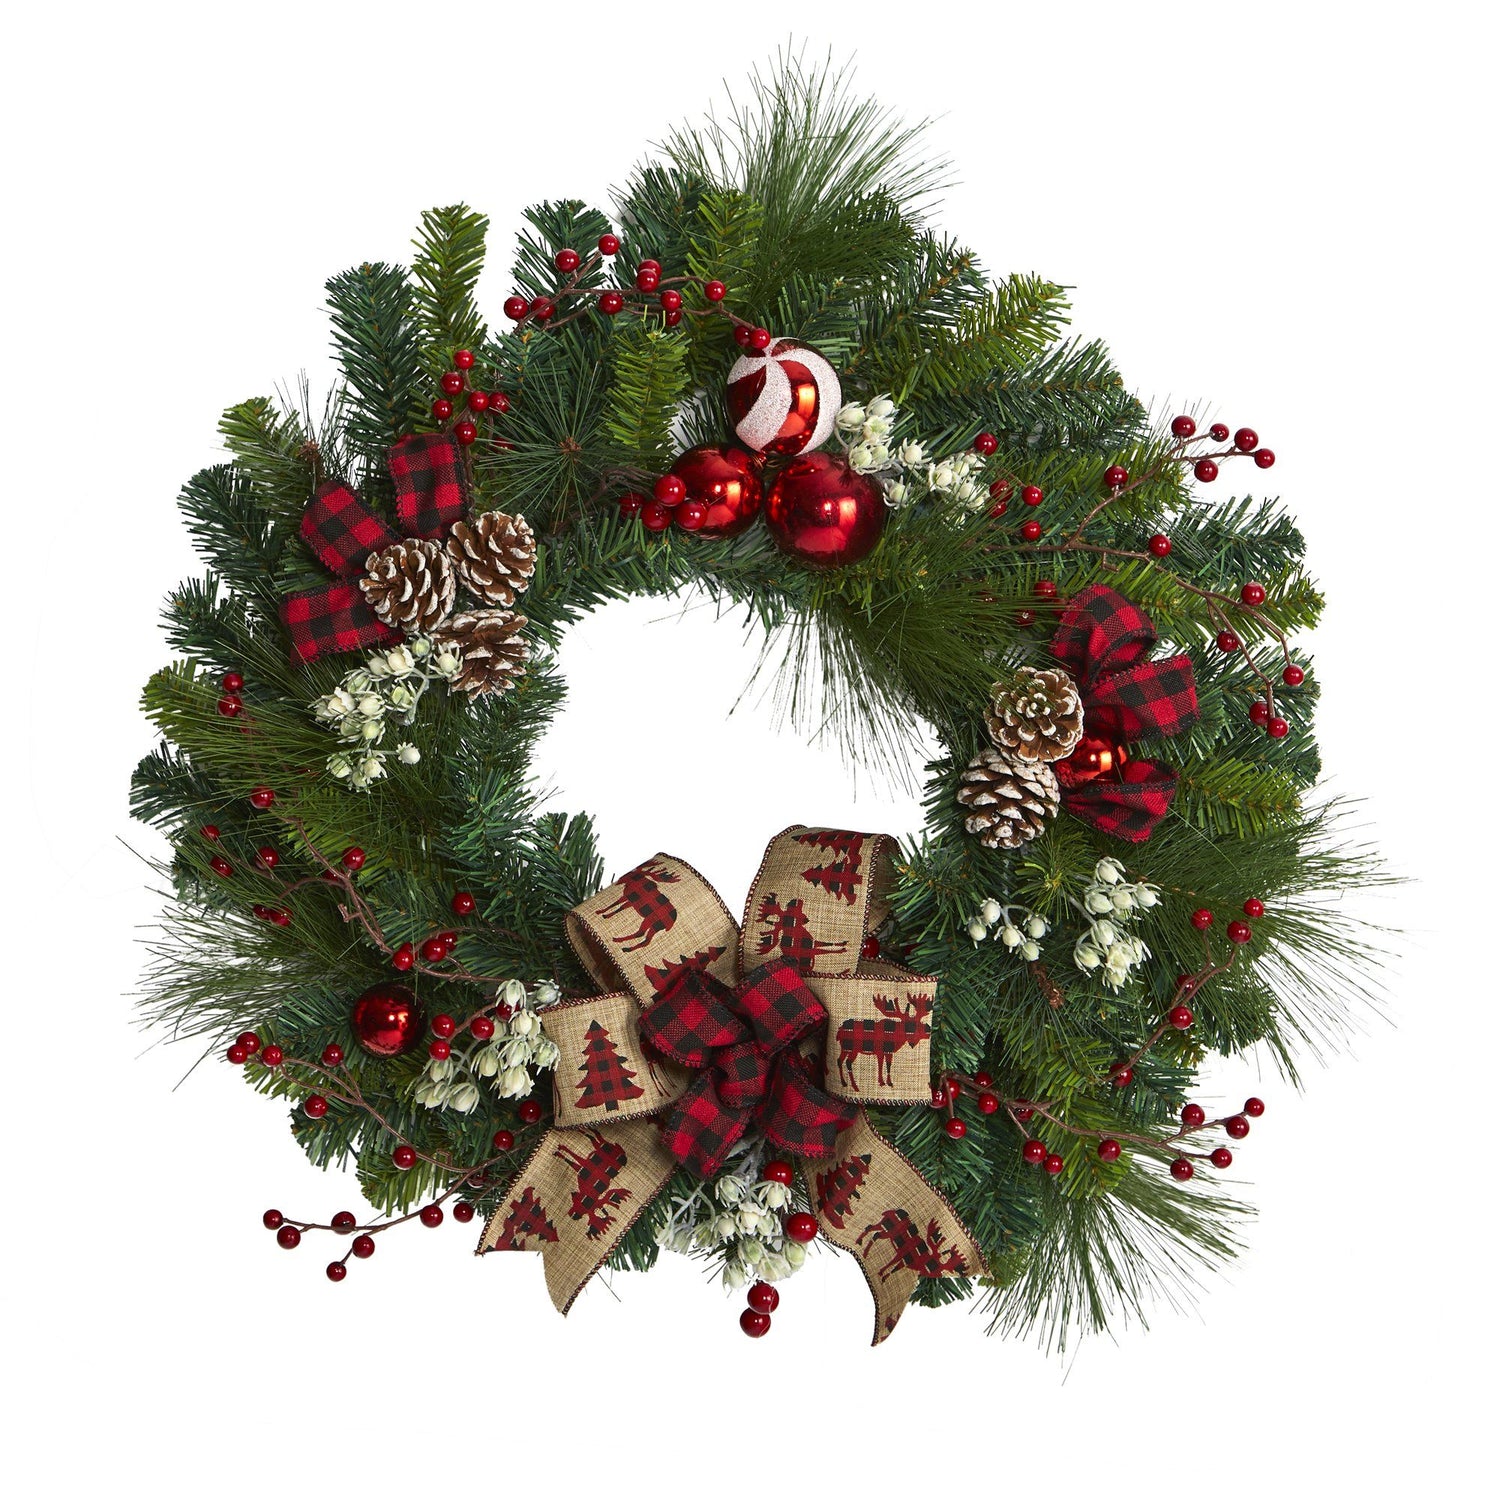 24” Christmas Pine Artificial Wreath with Pine Cones and Ornaments